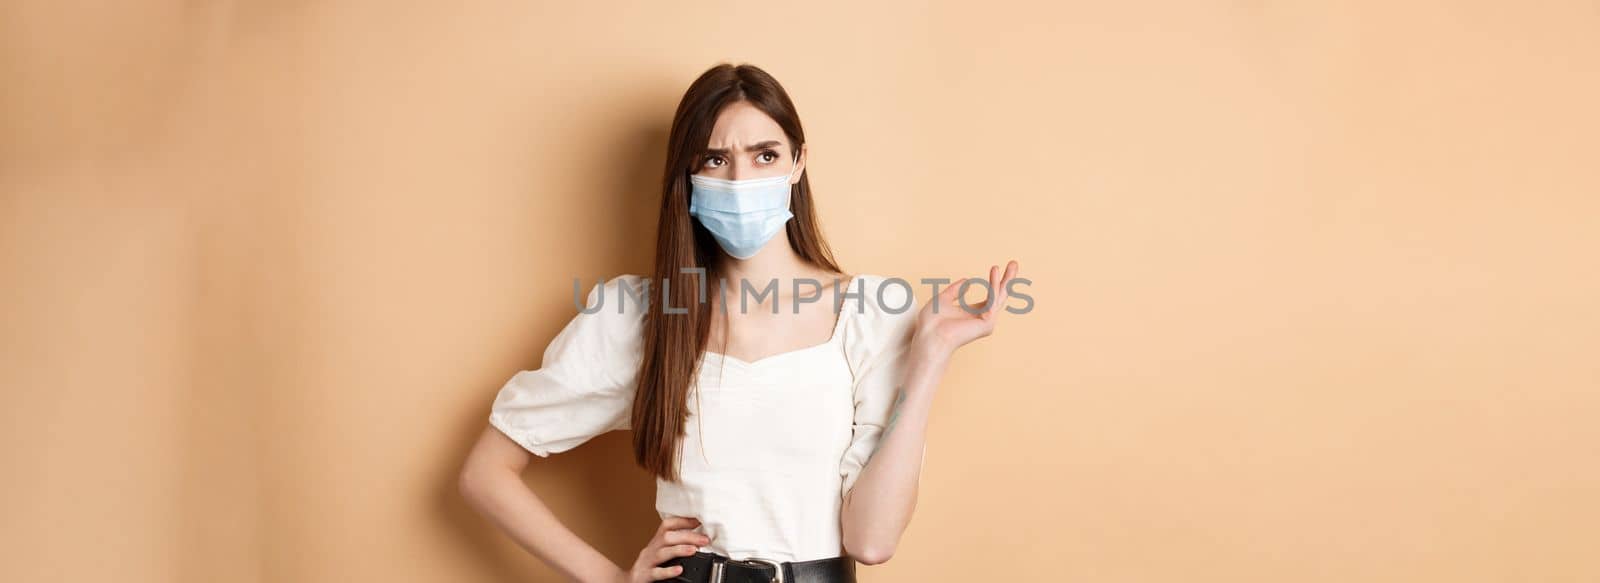 Covid-19 and lifestyle concept. Confused girl in face mask looking at upper left corner with troubled face, standing on beige background.